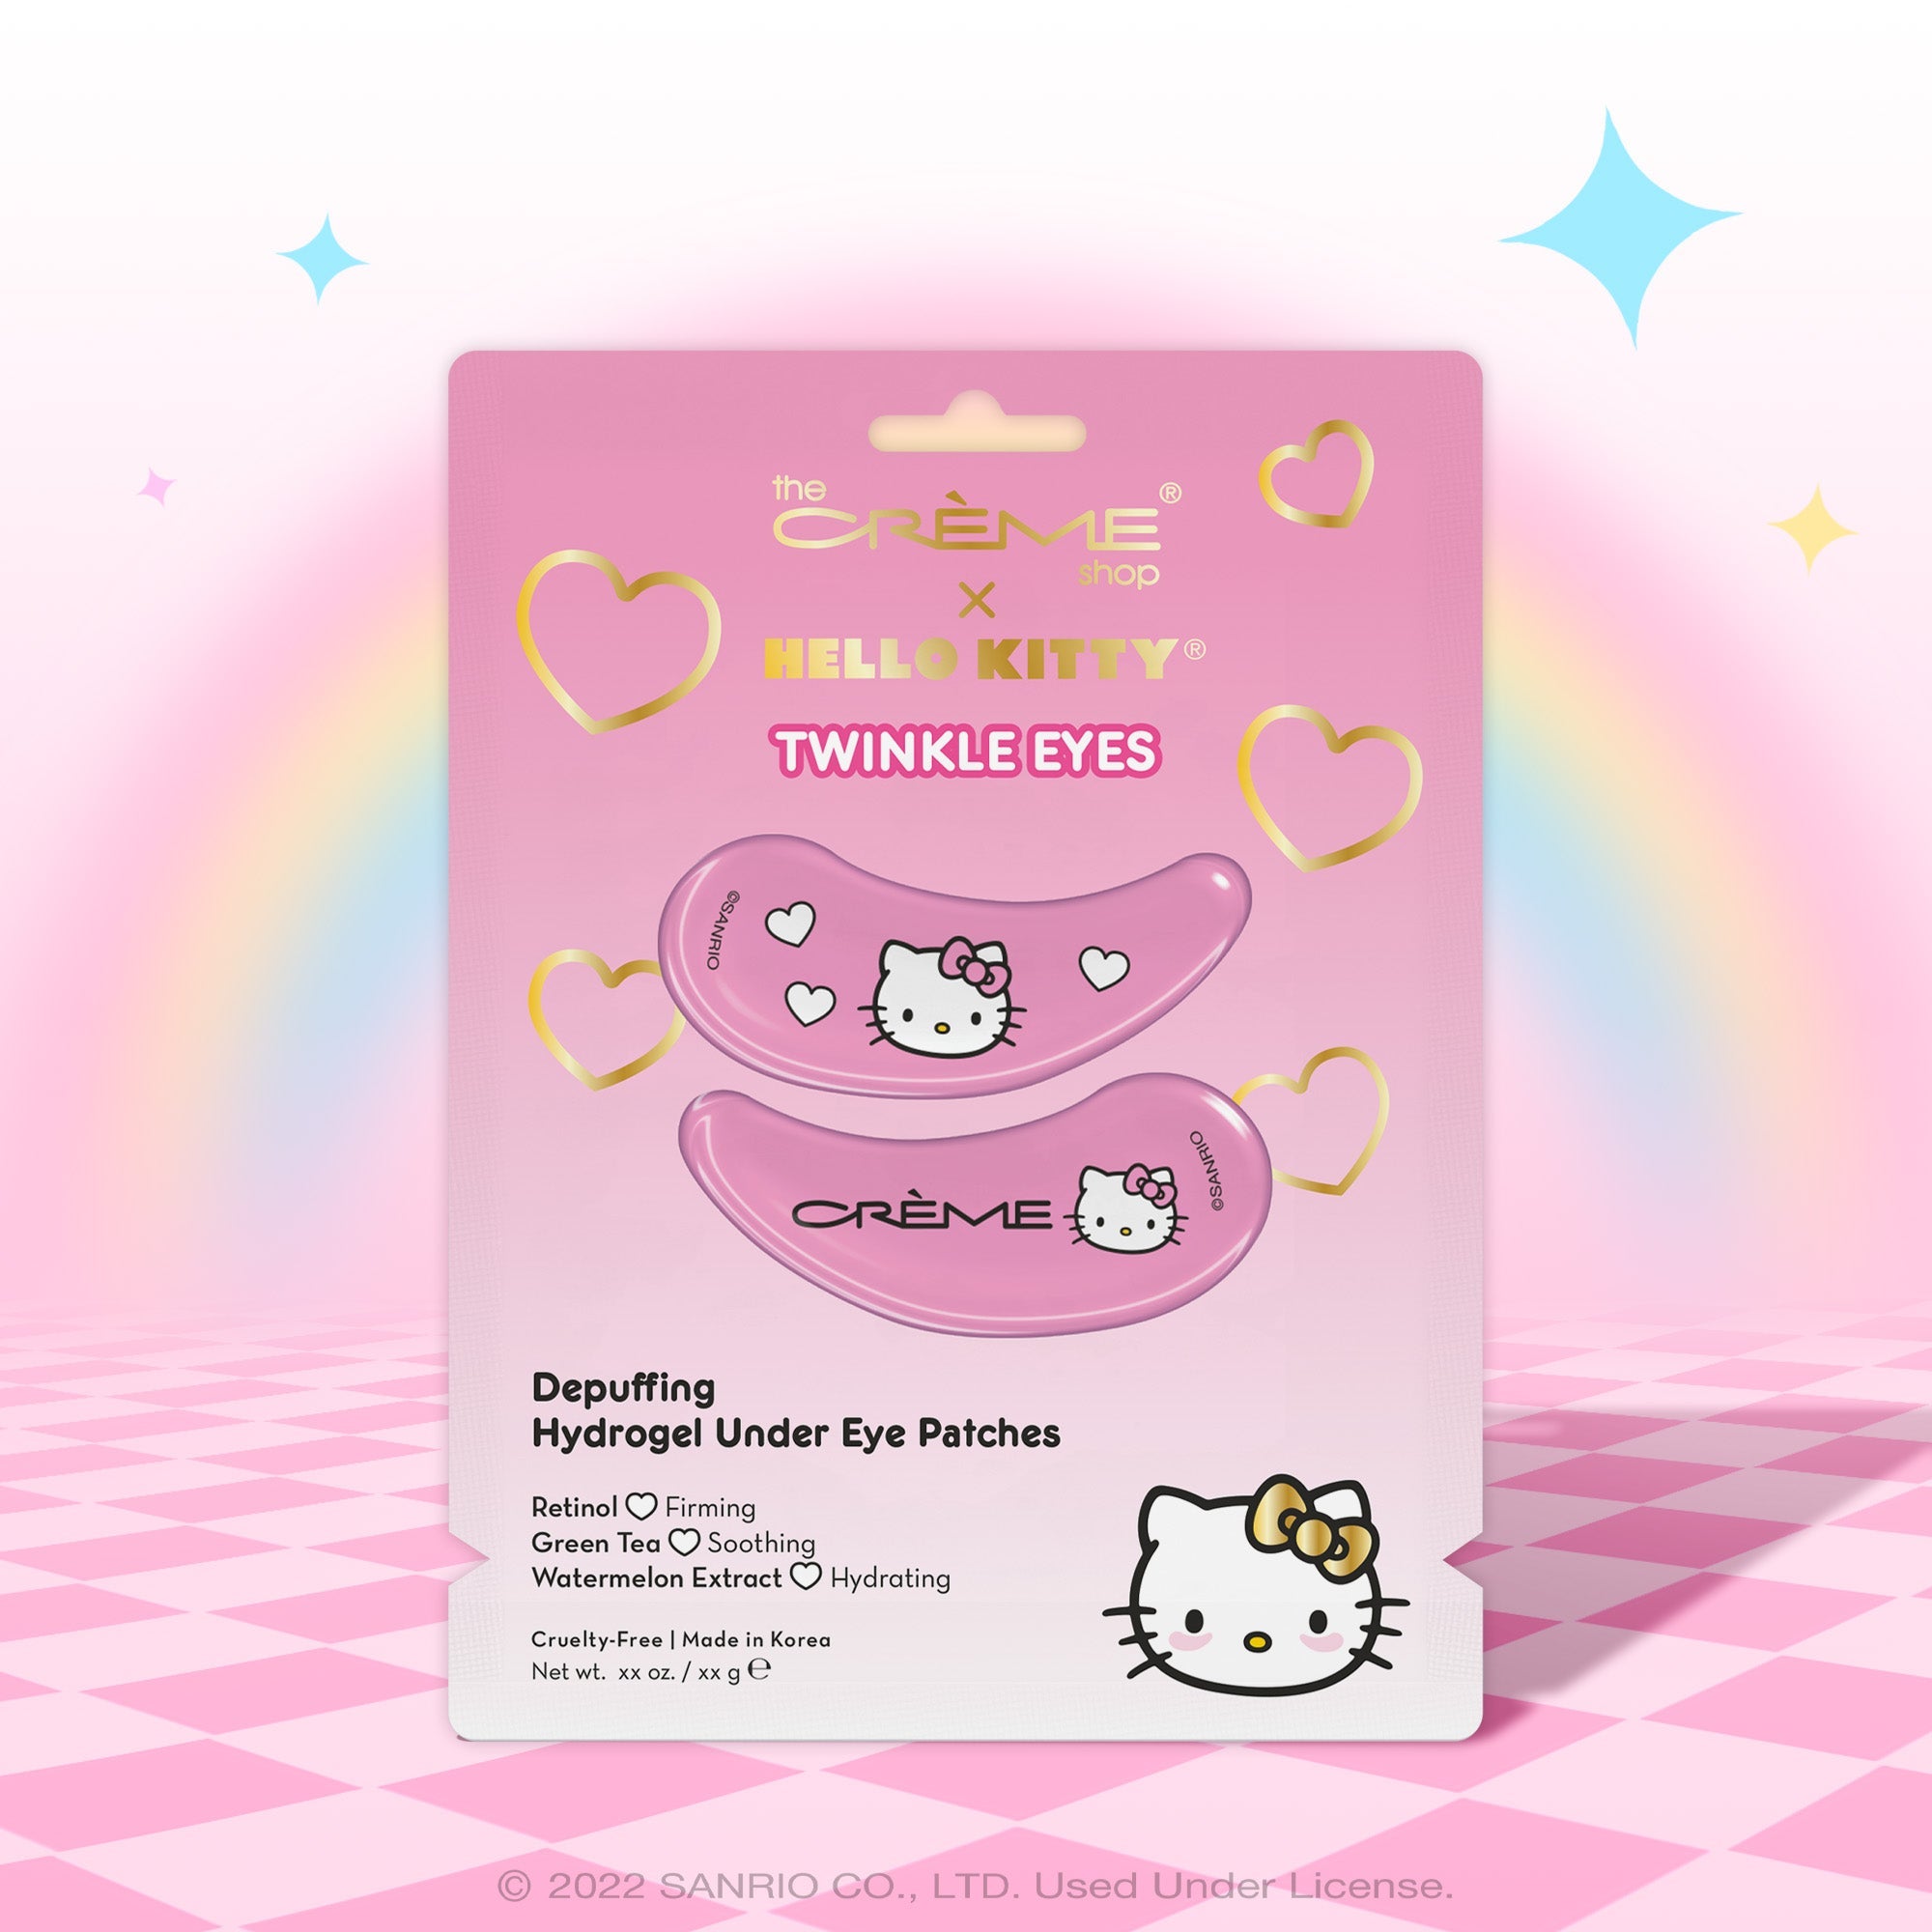 The Crème Shop x Hello Kitty Twinkle Eyes Depuffing Hydrogel Under Eye Patches